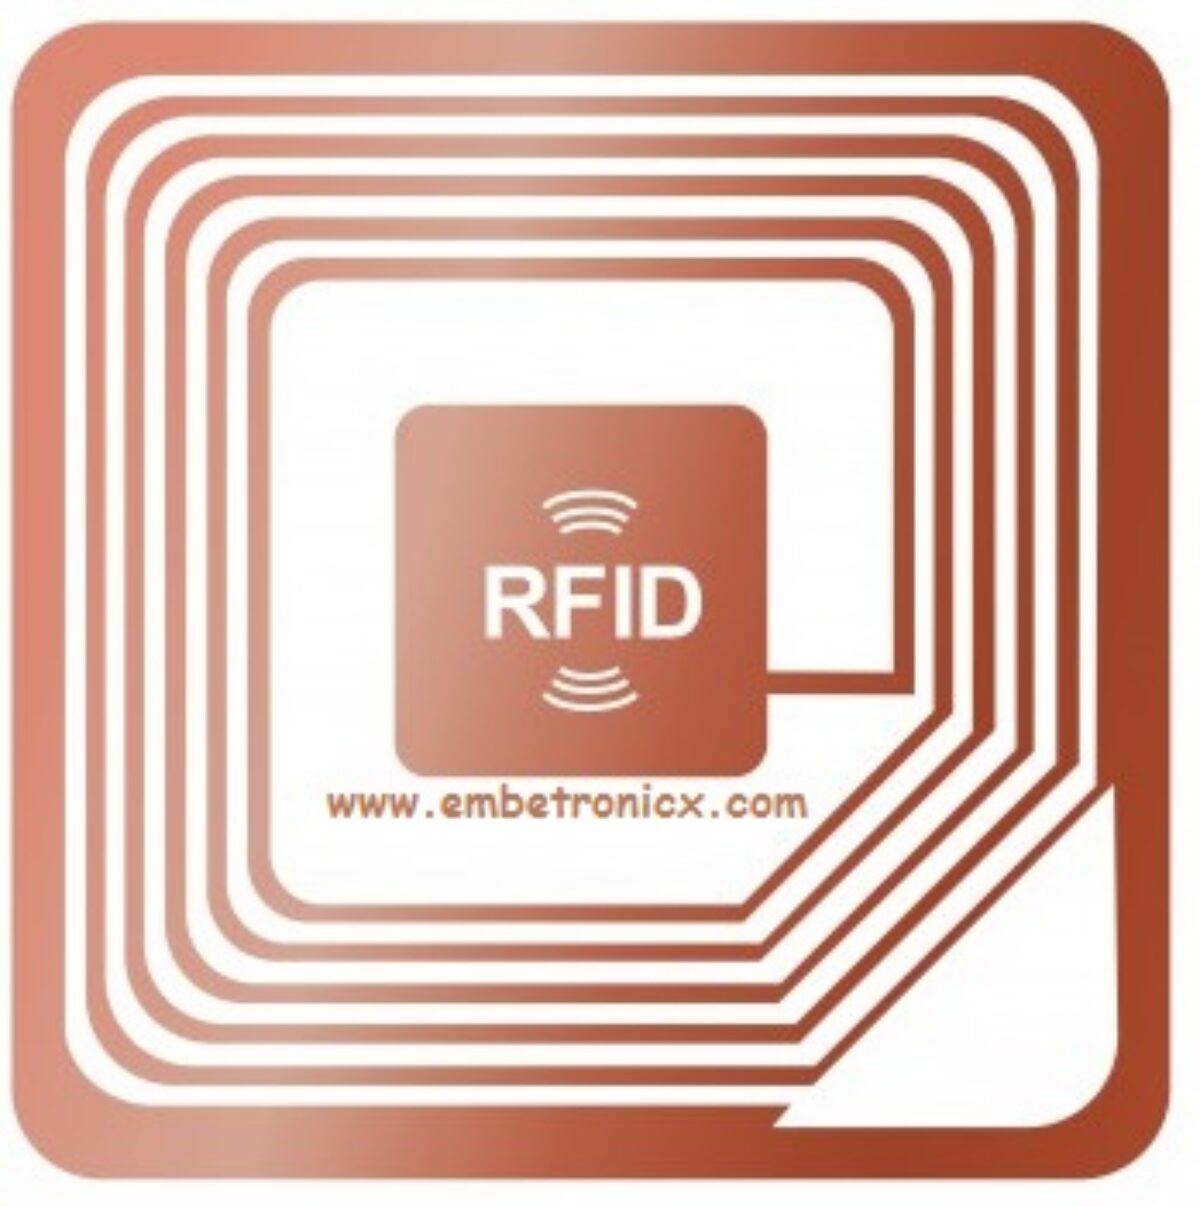 How Does RFID Work? What is RFID?